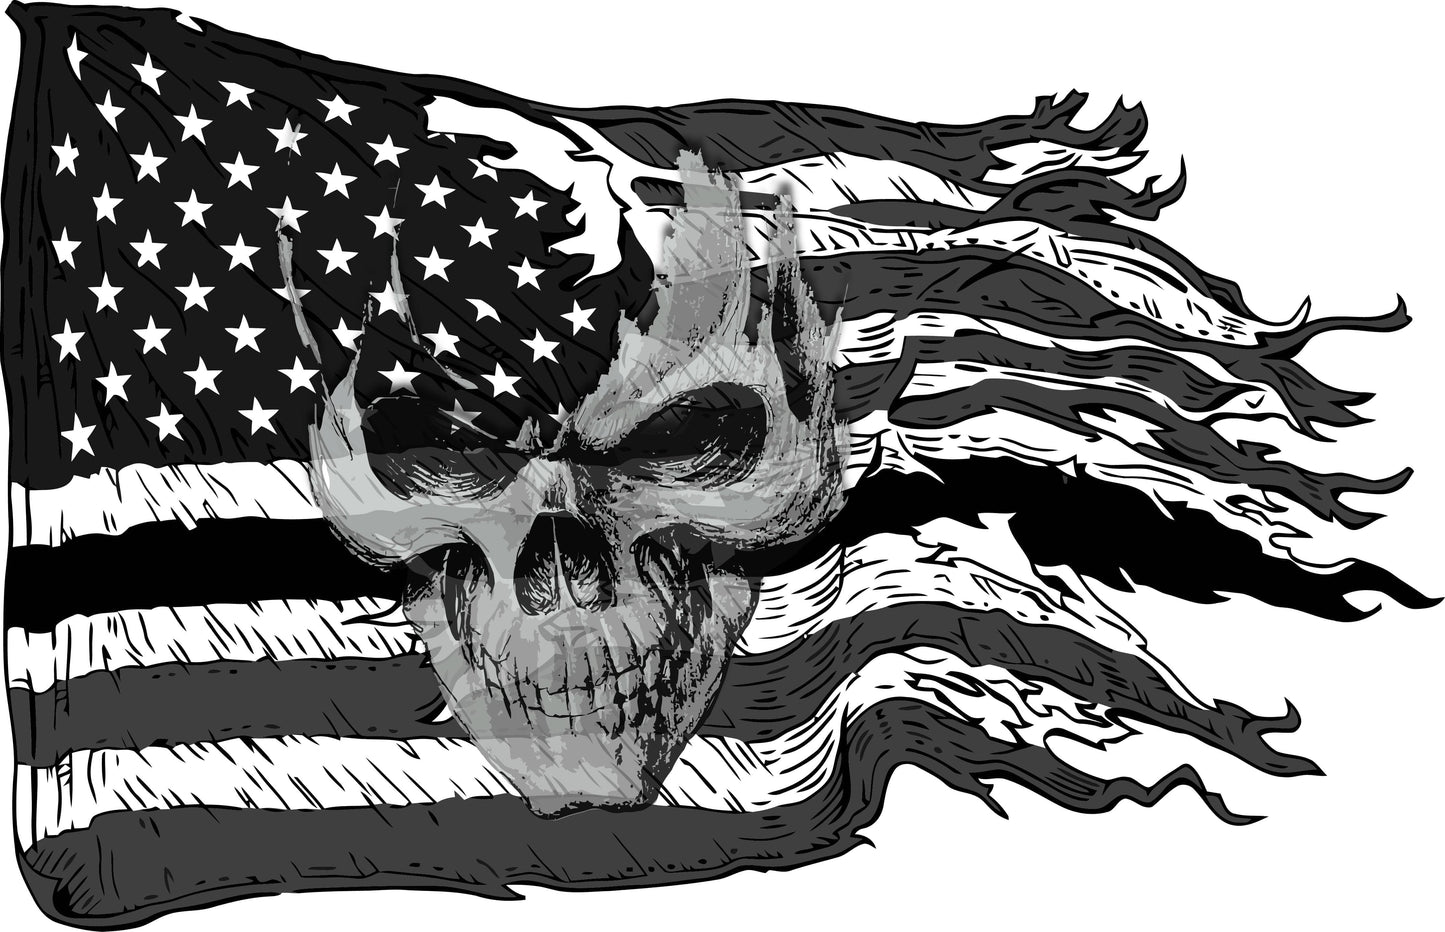 American ripped flag black & white with skull decal